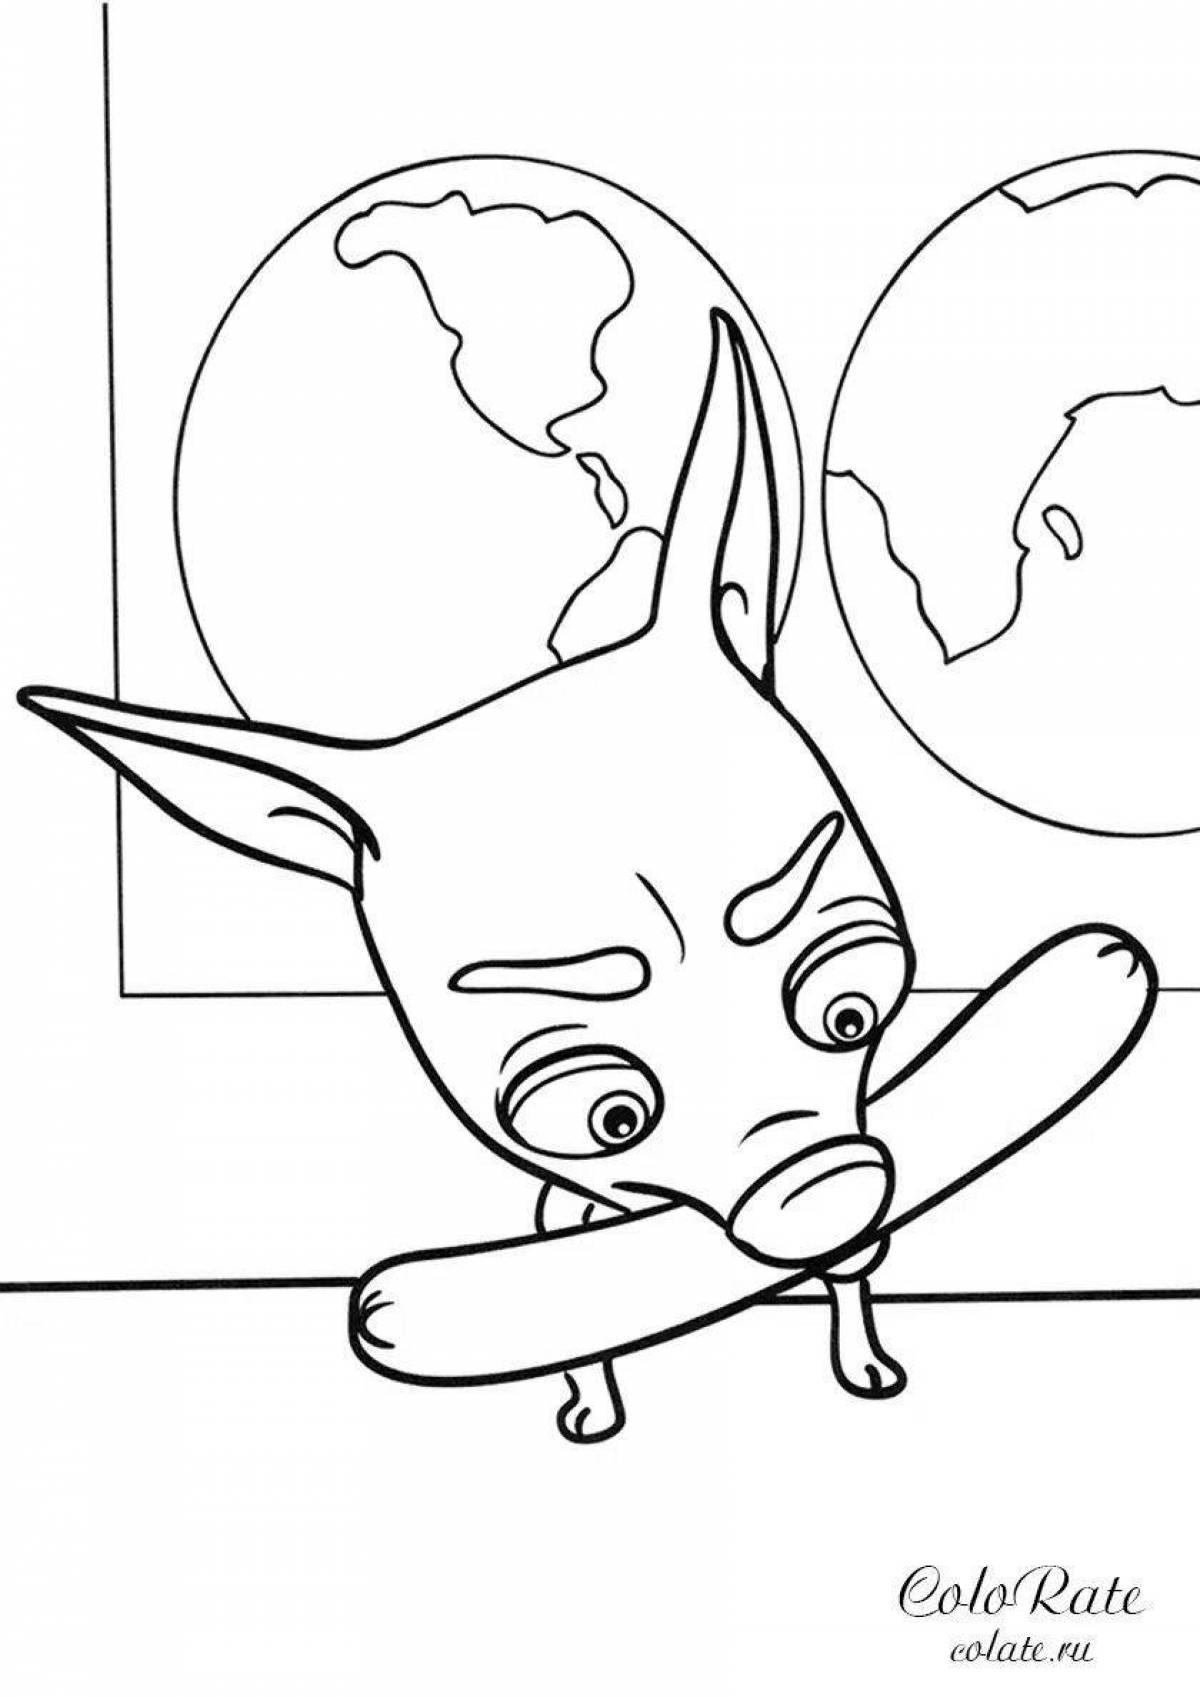 Great pliers coloring page